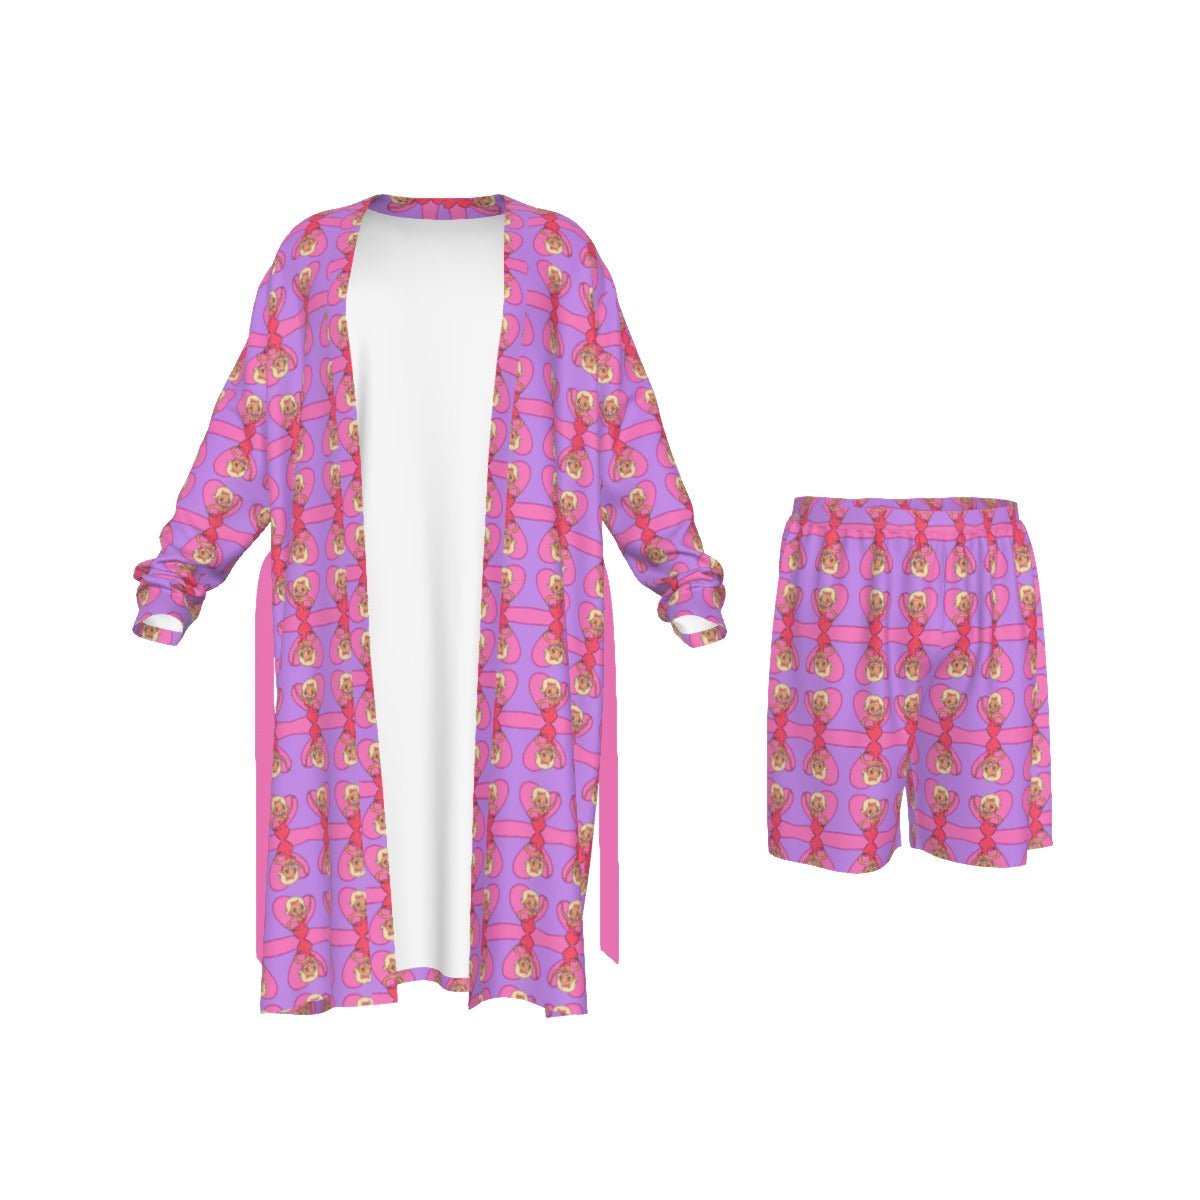 Jaymes Mansfield - I Have These Kimono Pajamas Suit - dragqueenmerch